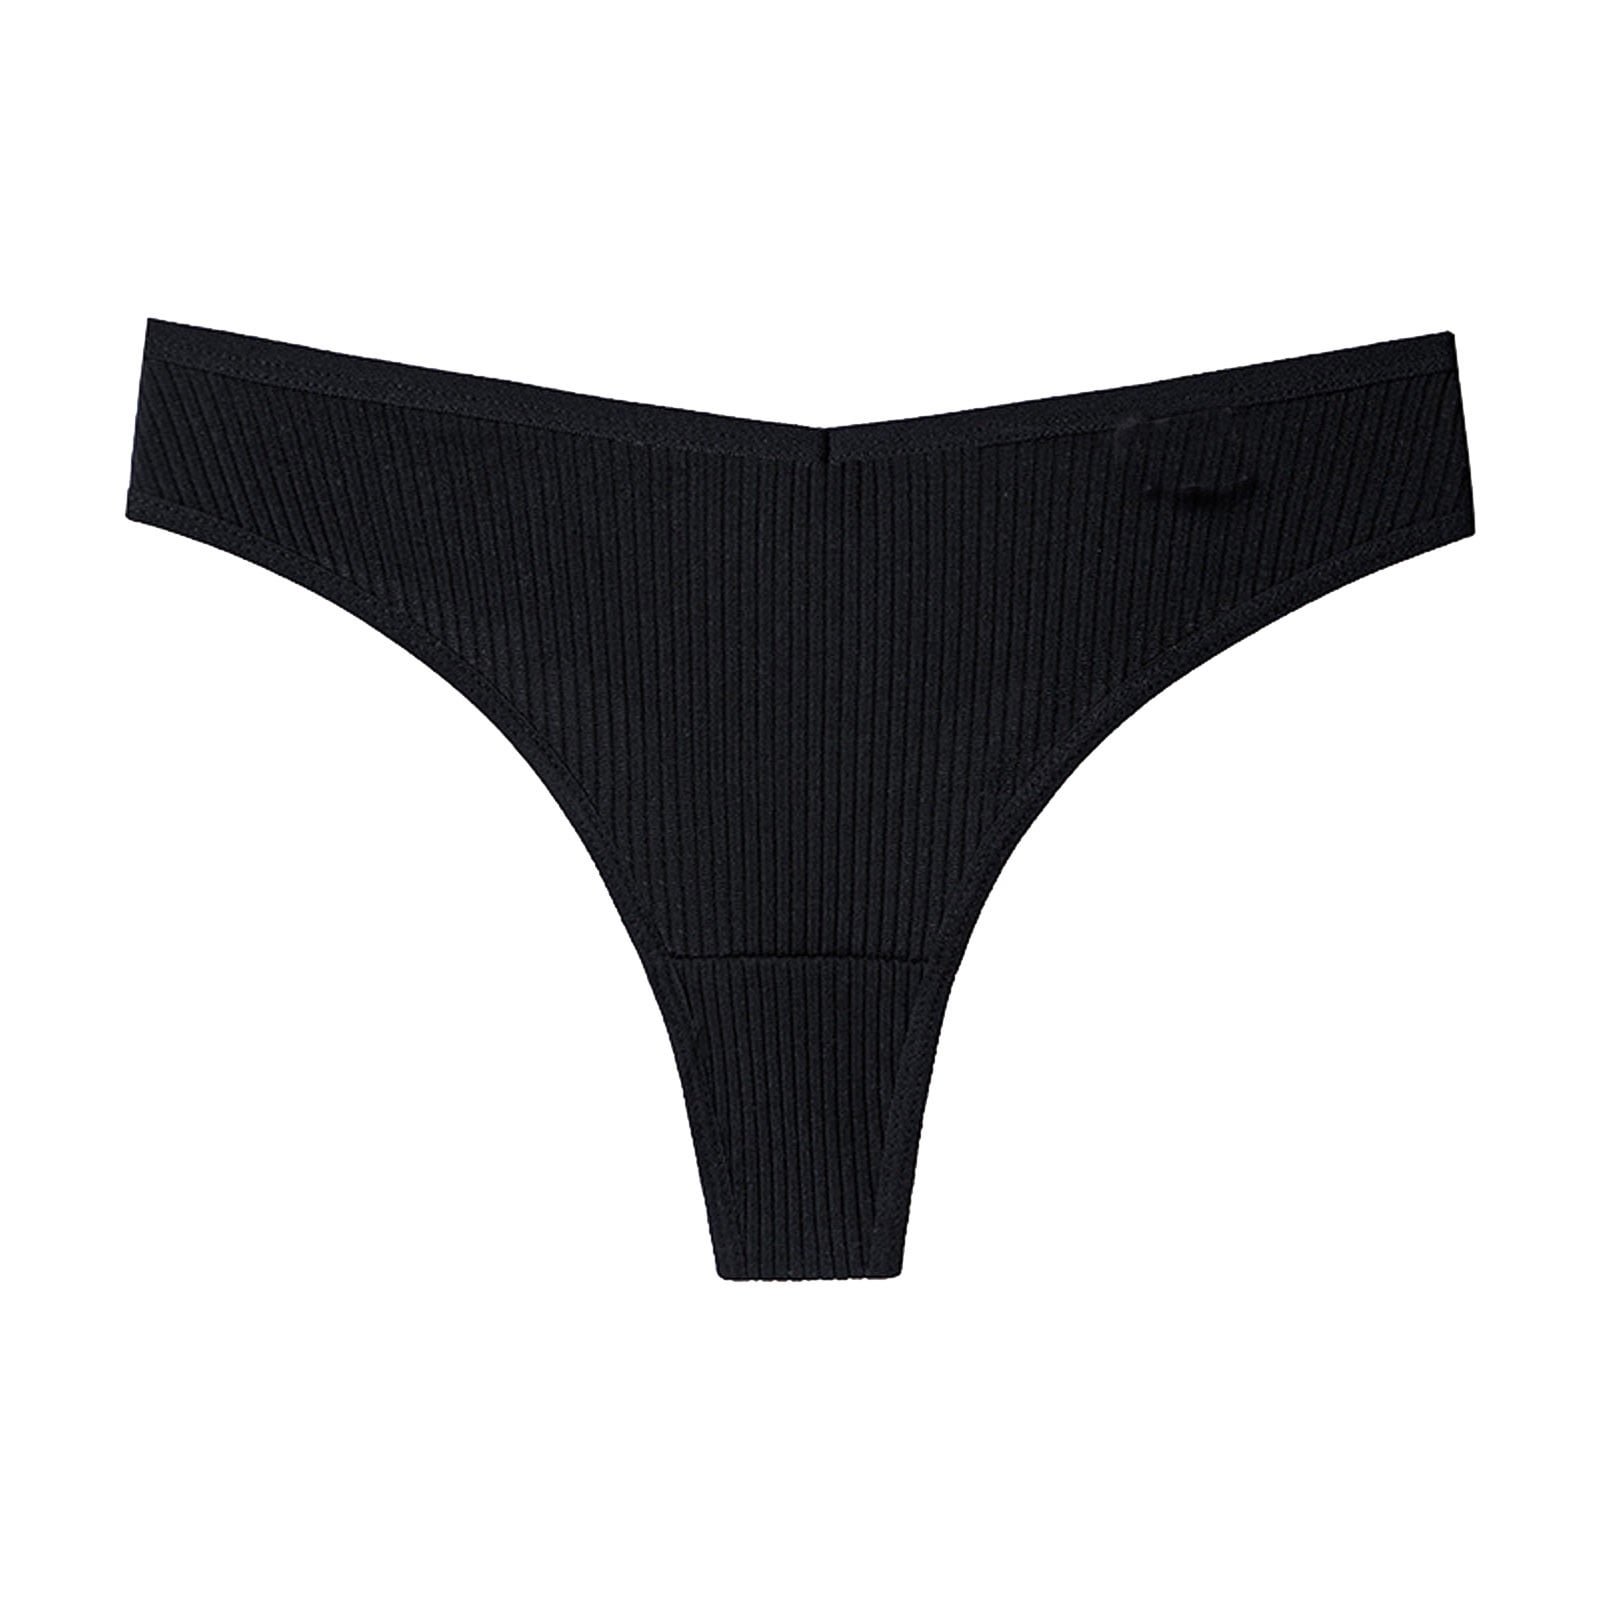 Buy G-string Women's Panties Seamless Perspective Transparent Underwear  Sexy Women Underpants Female Thong Brazilian Lingerie Online in India 